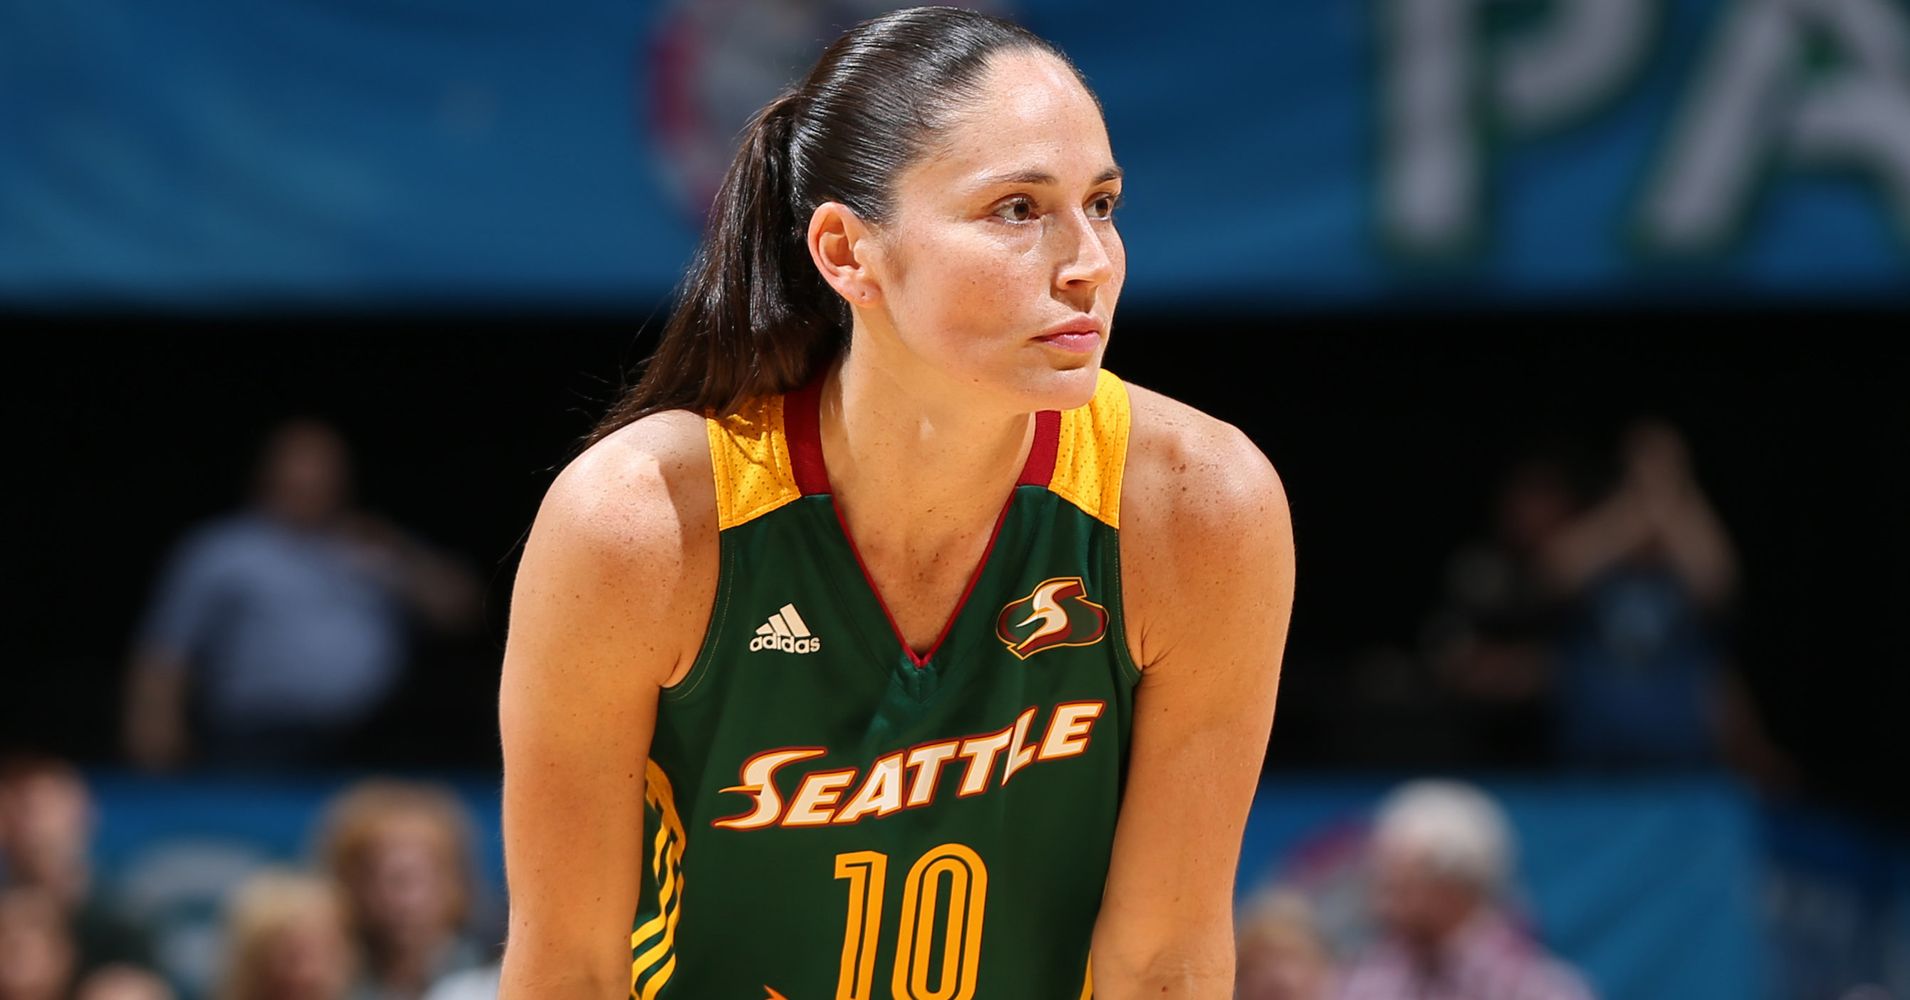 Sue Bird Dishes Out WNBA All-Star Record 11 Assists! - YouTube